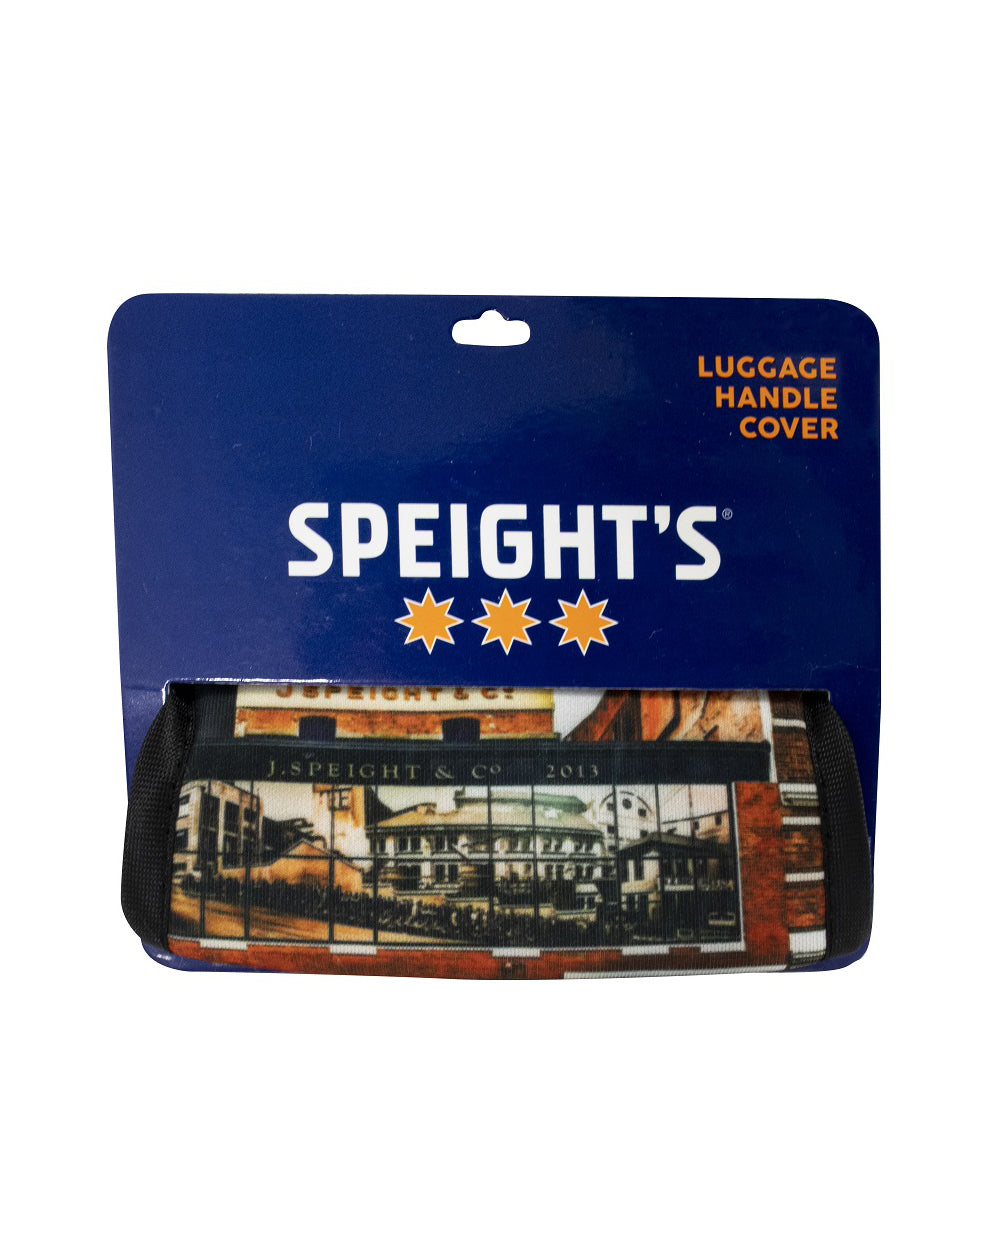 Speight's Luggage Handle Cover -  Beer Gear Apparel & Merchandise - Speights - Lion Red - VB - Tokyo Dy merch